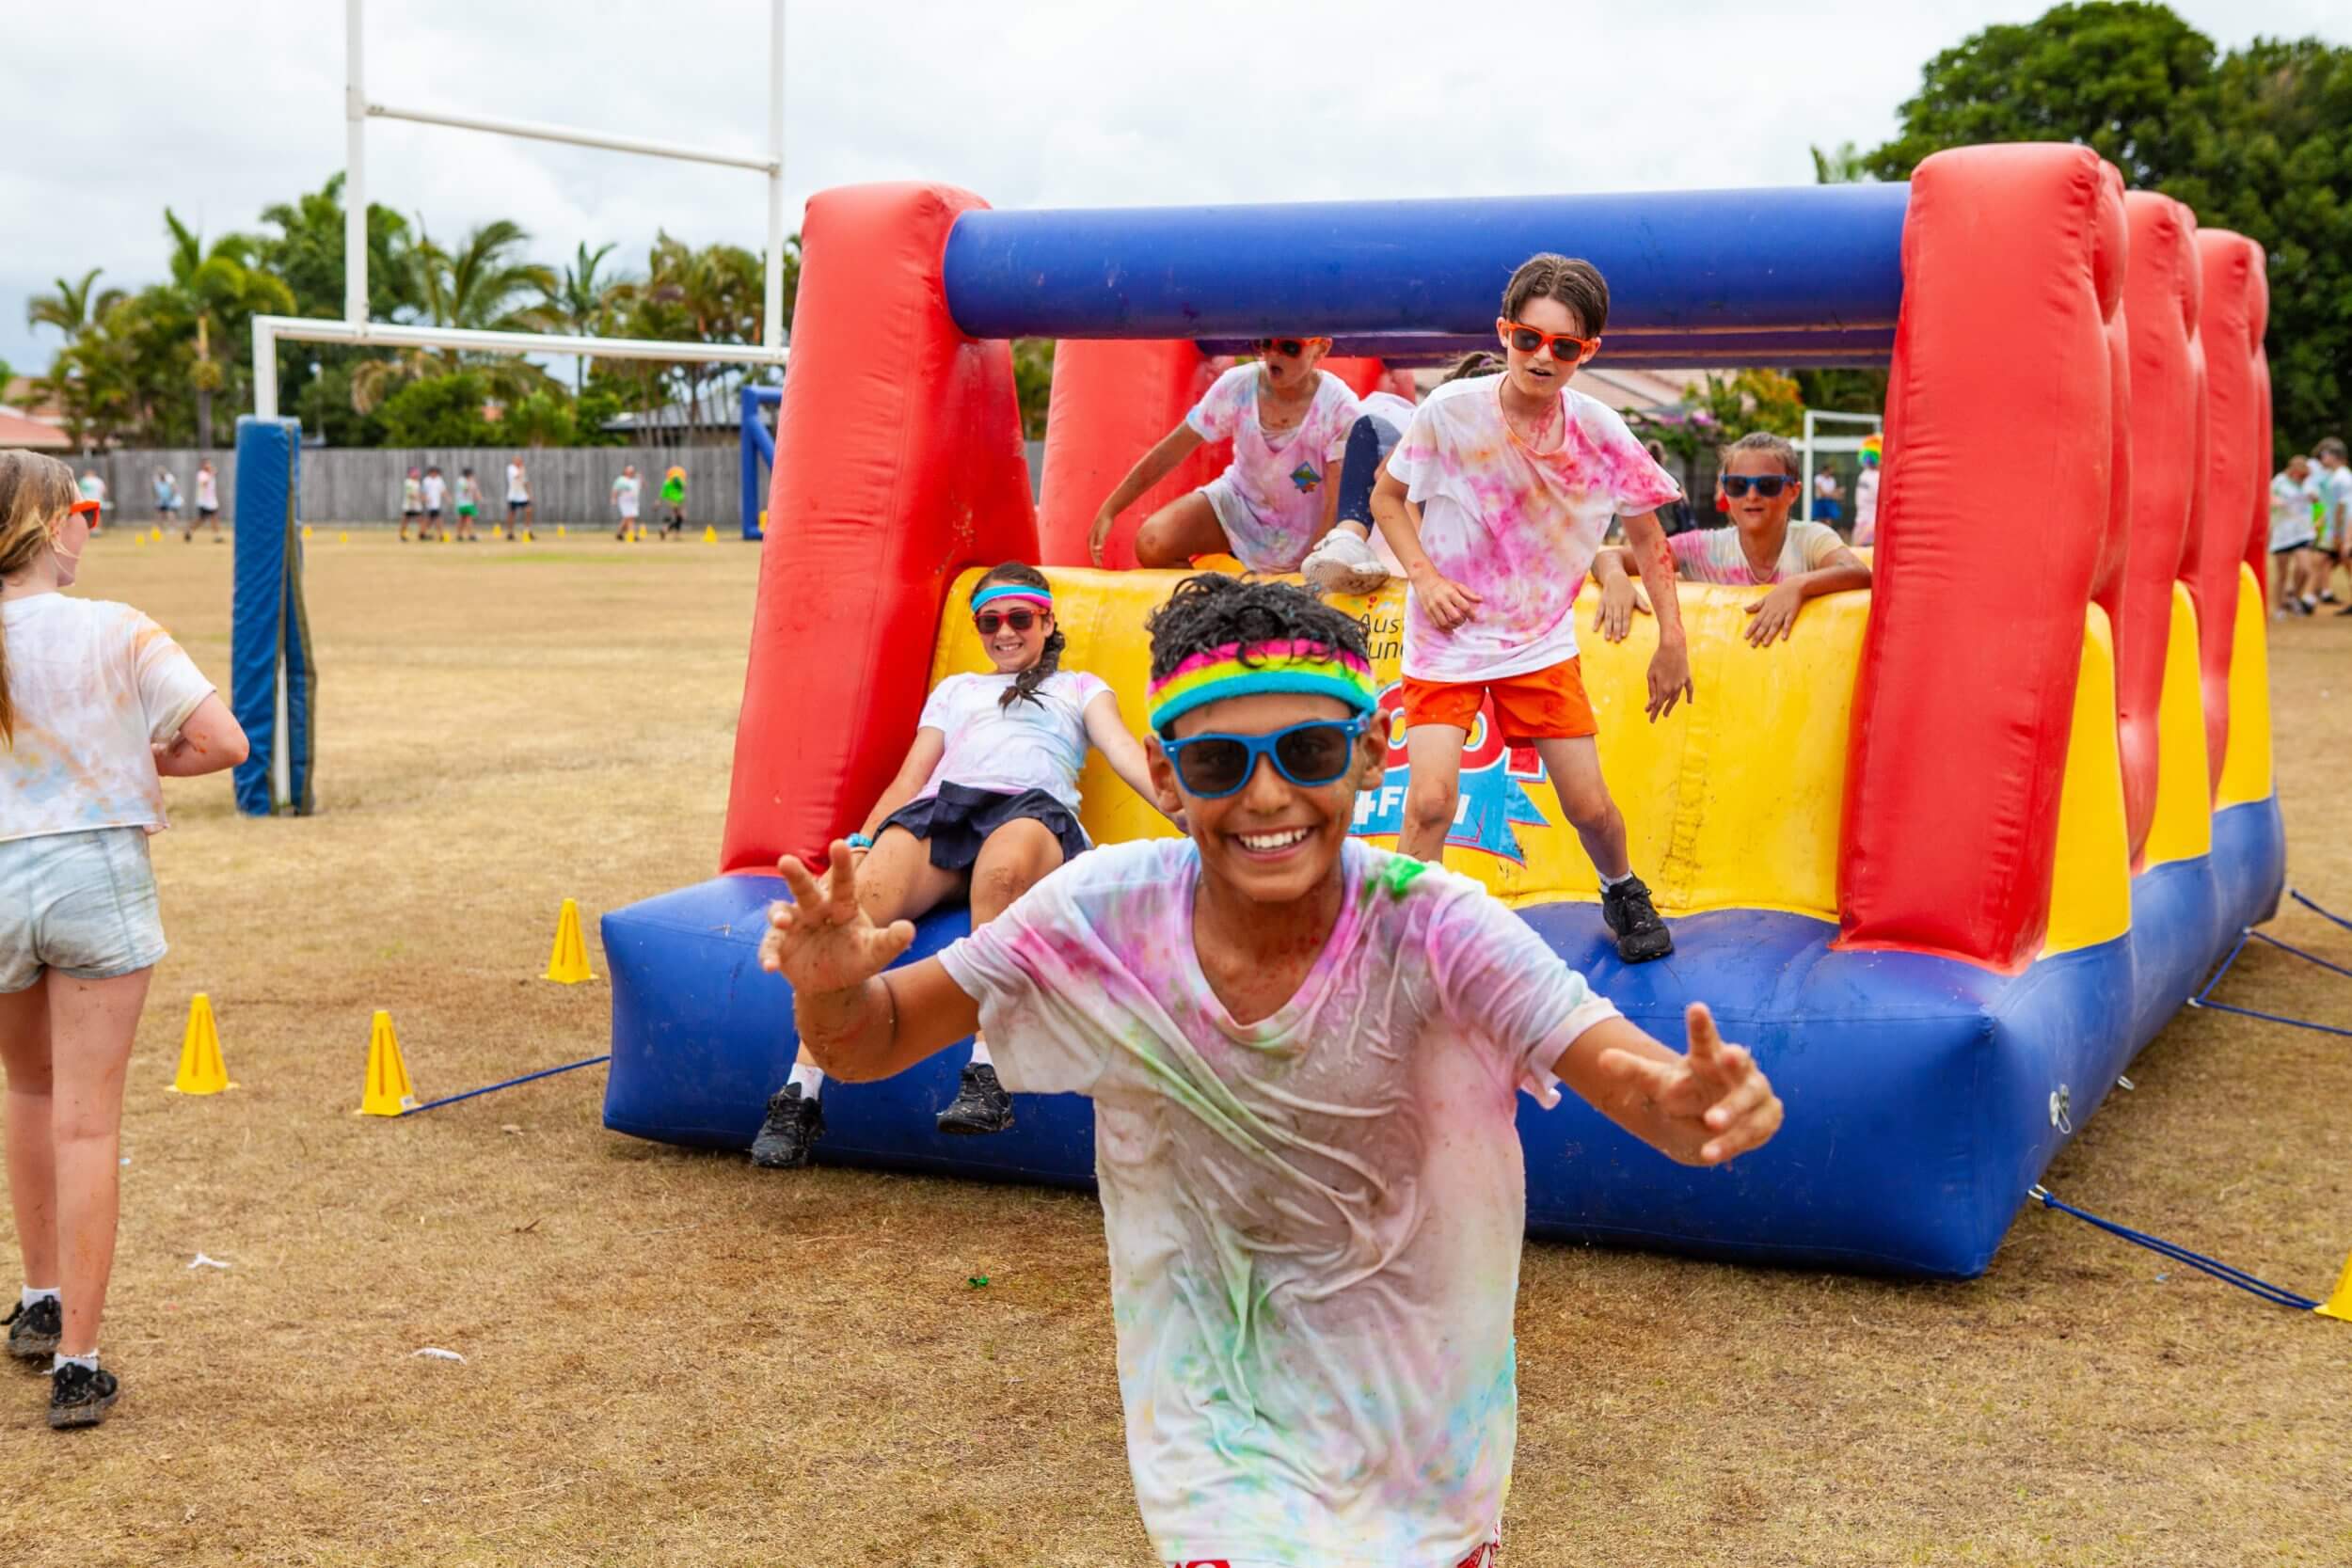 Awesome inflatable event days with Australian Fundraising!